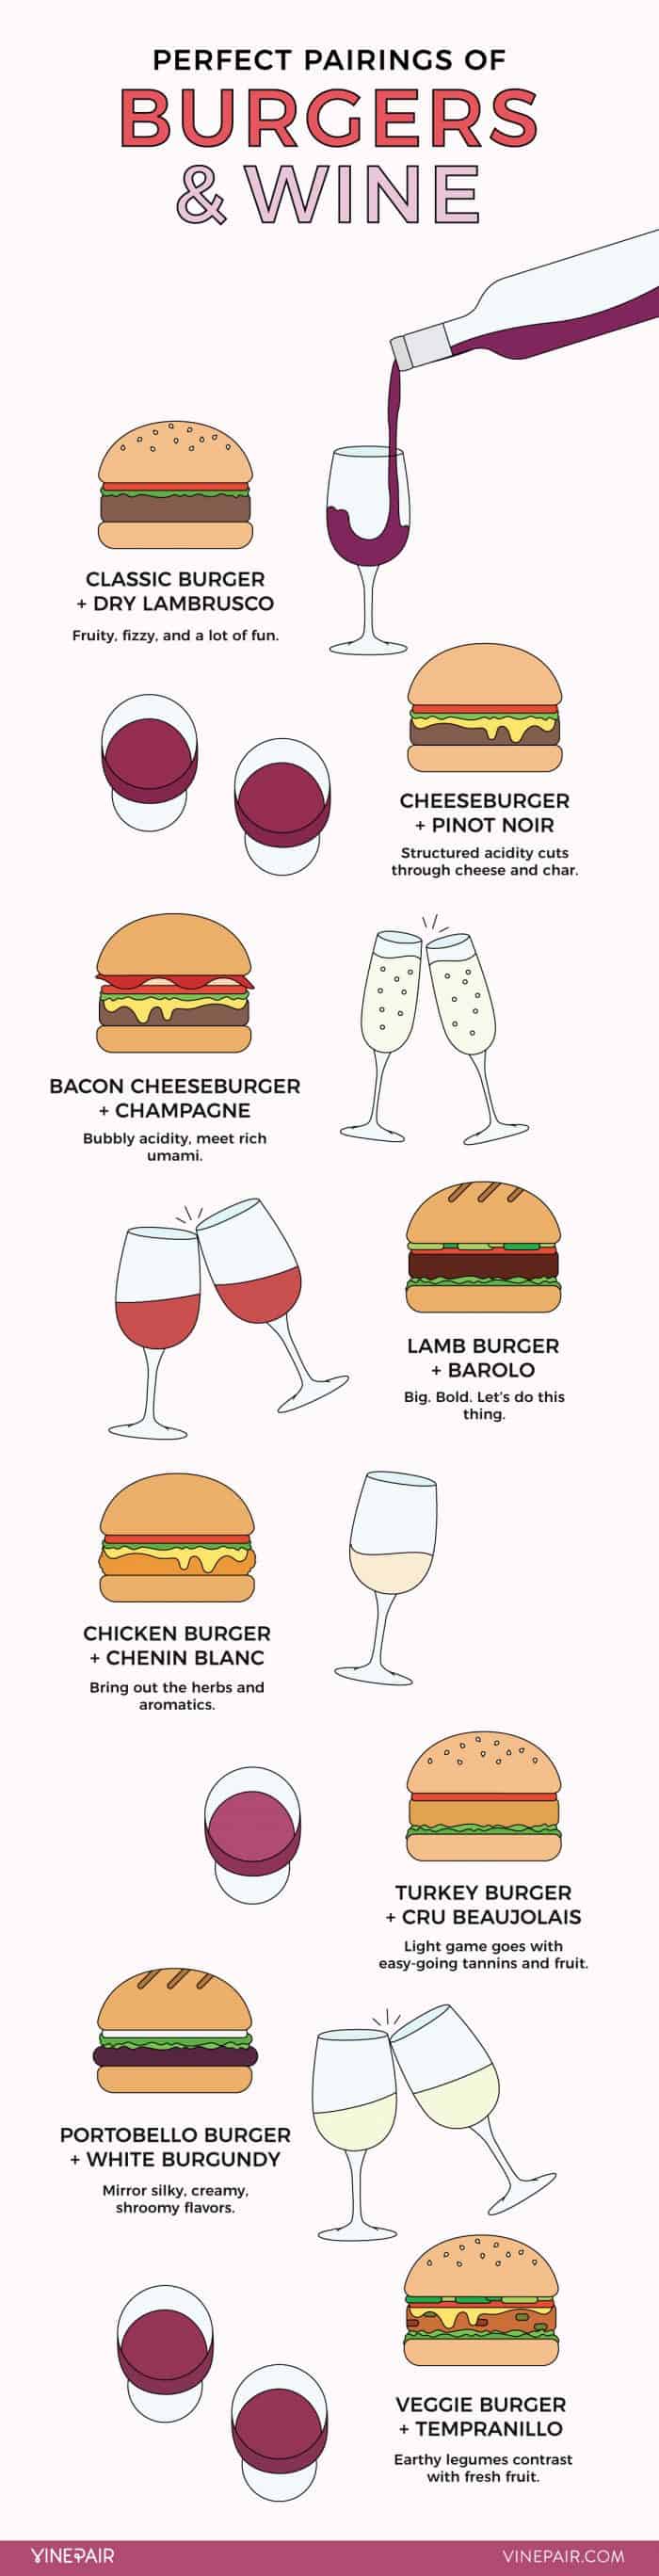 Description of burgers with wine for pairing